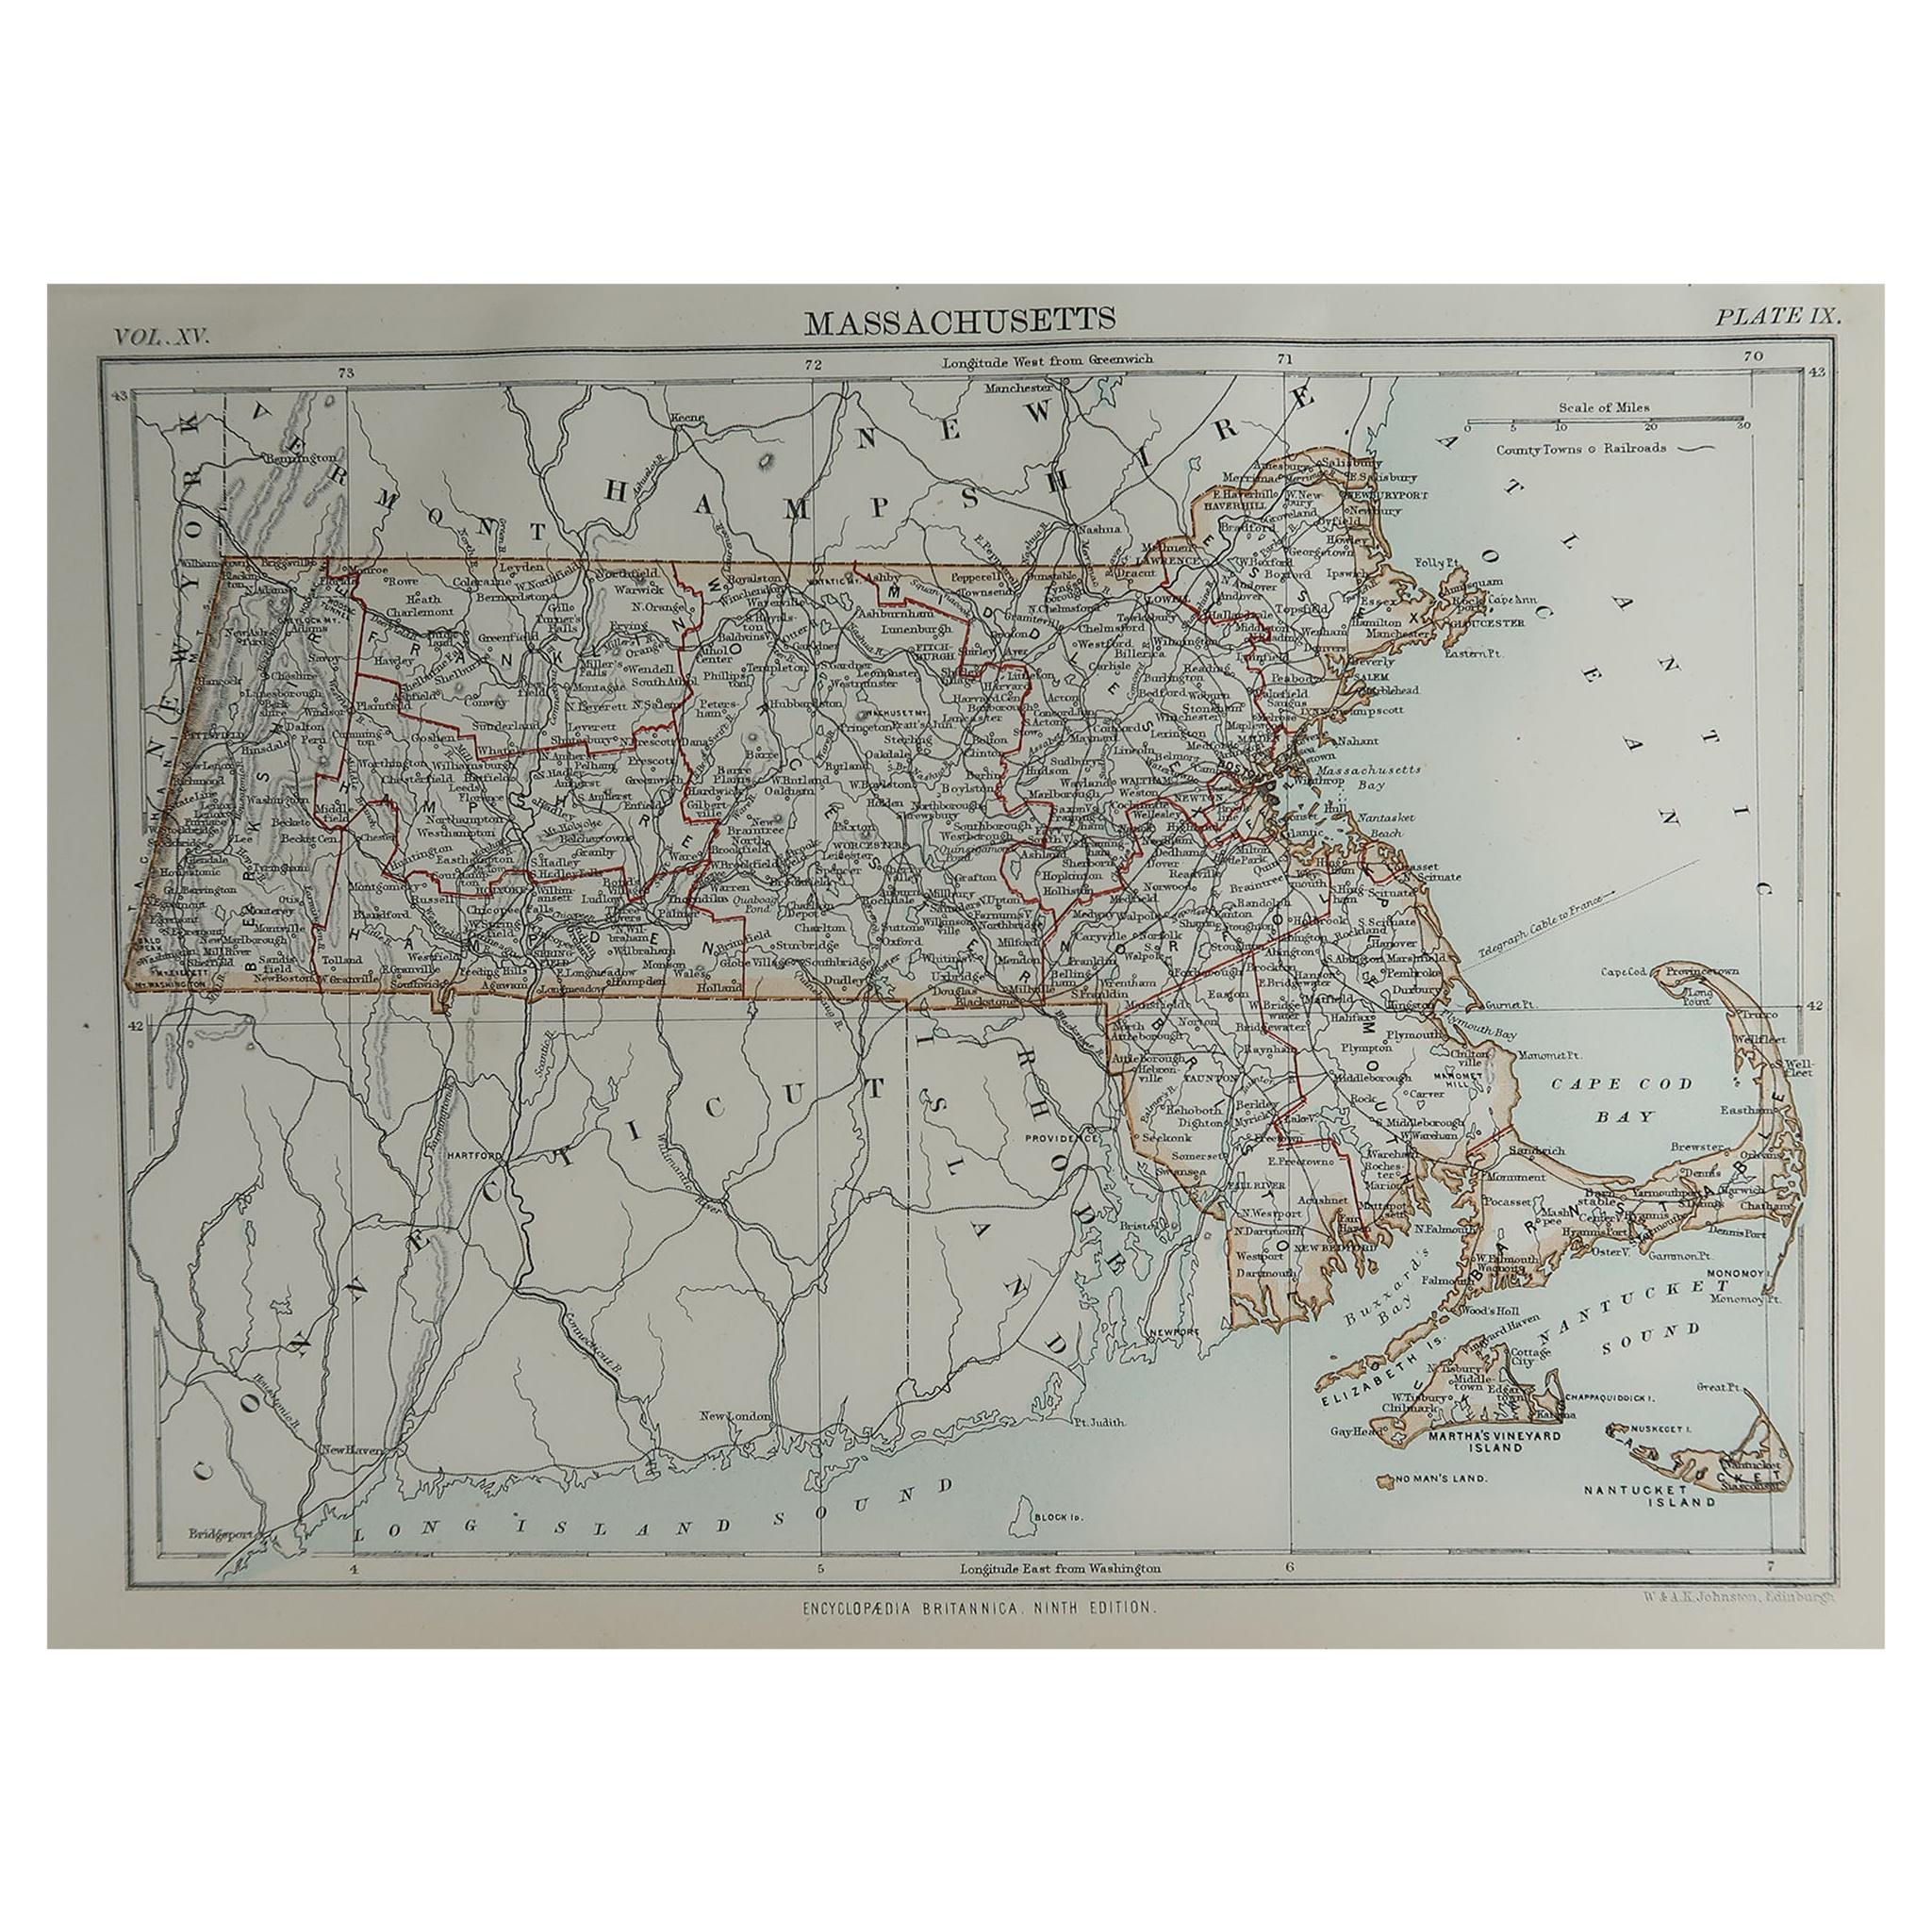 Original Antique Map of The American State of Massachusetts, 1889